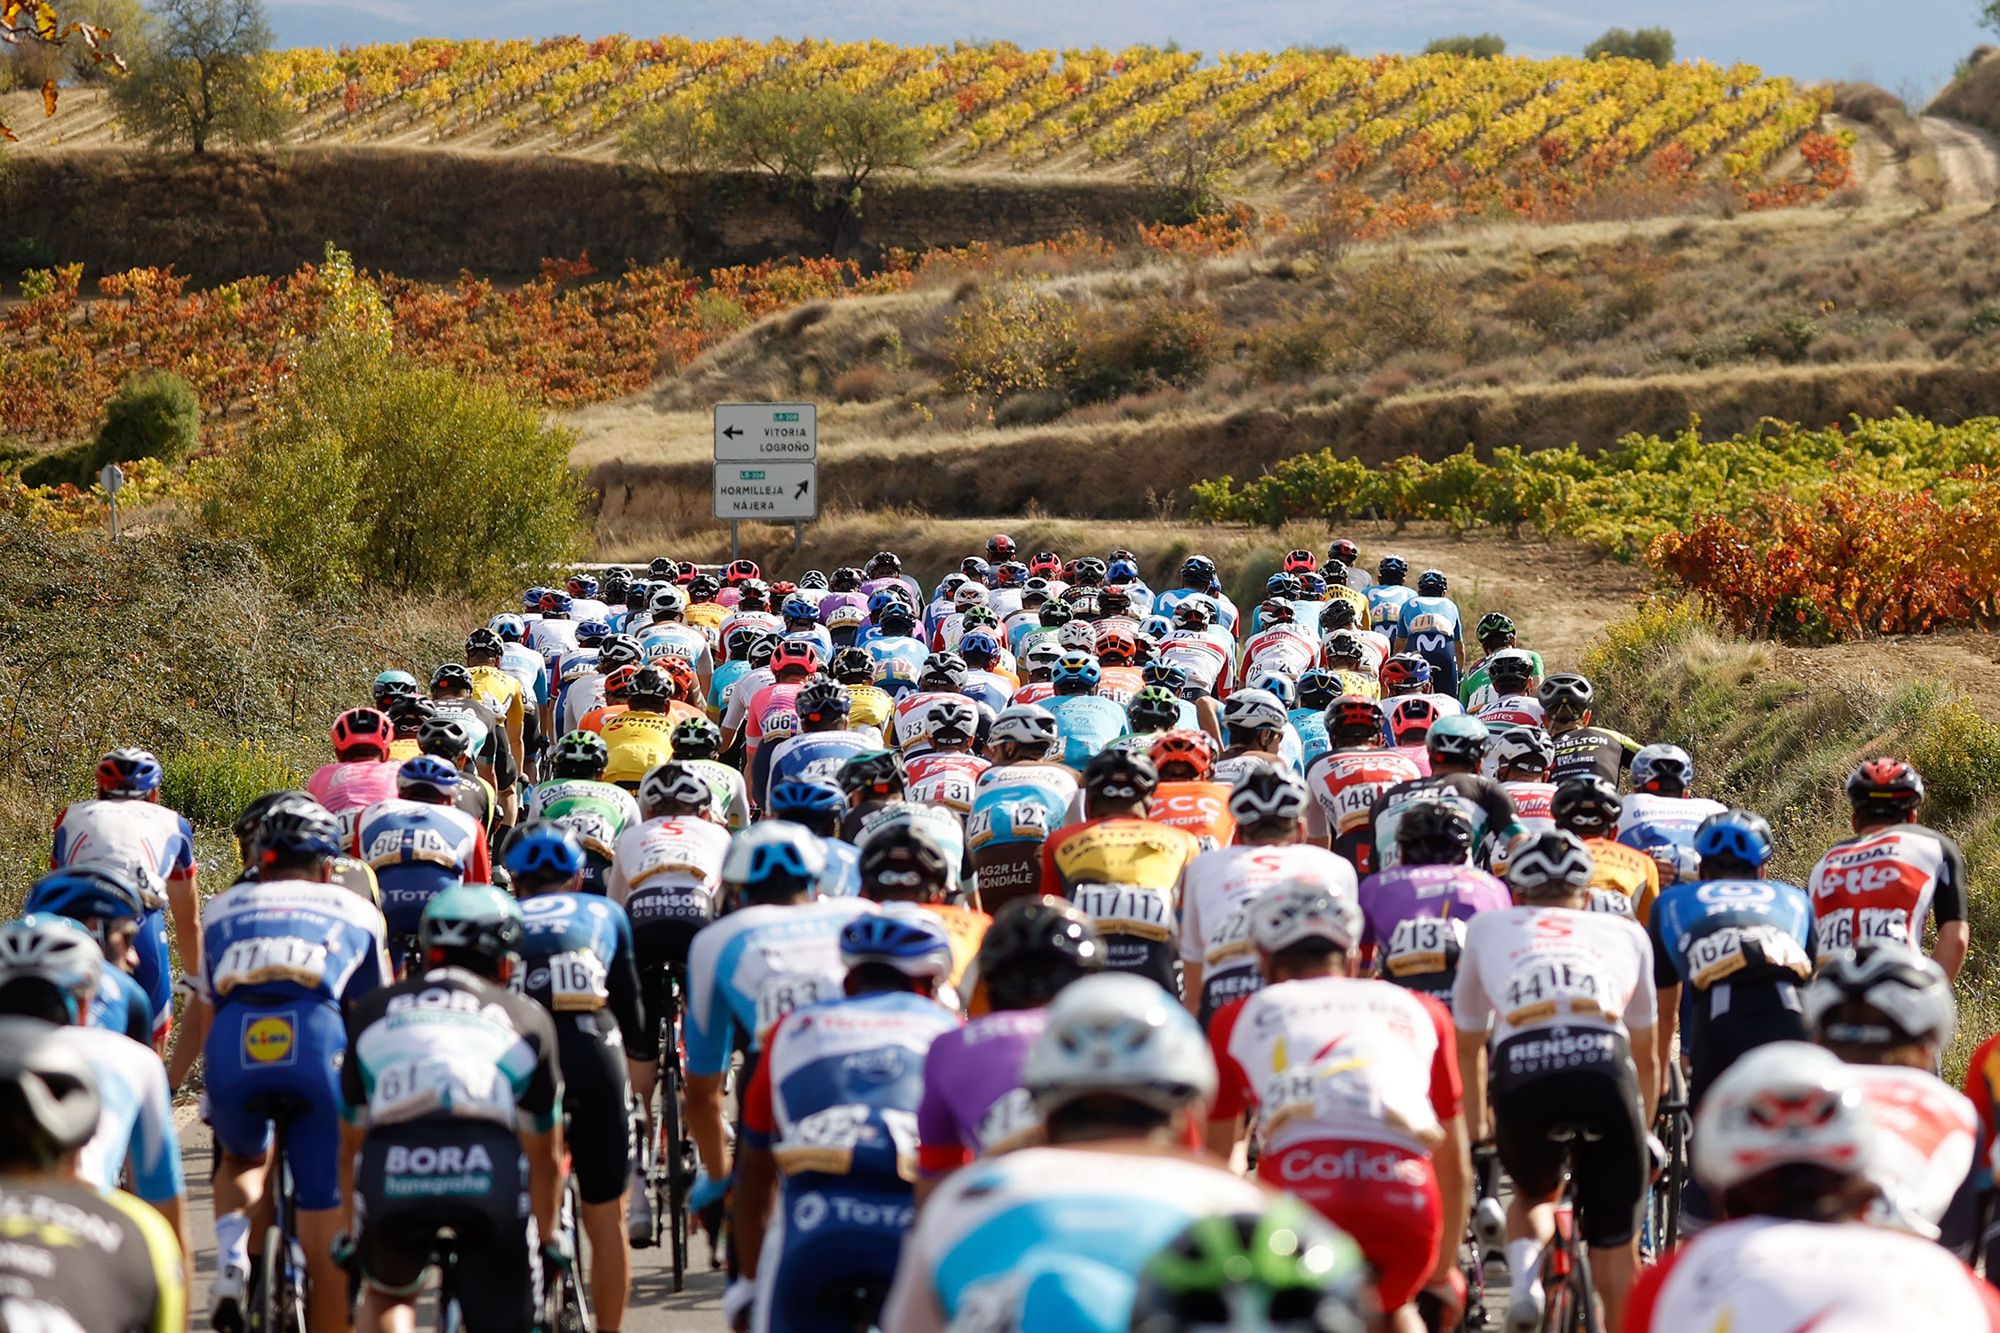 The peloton makes its way over the rolling and rural Spanish countryside